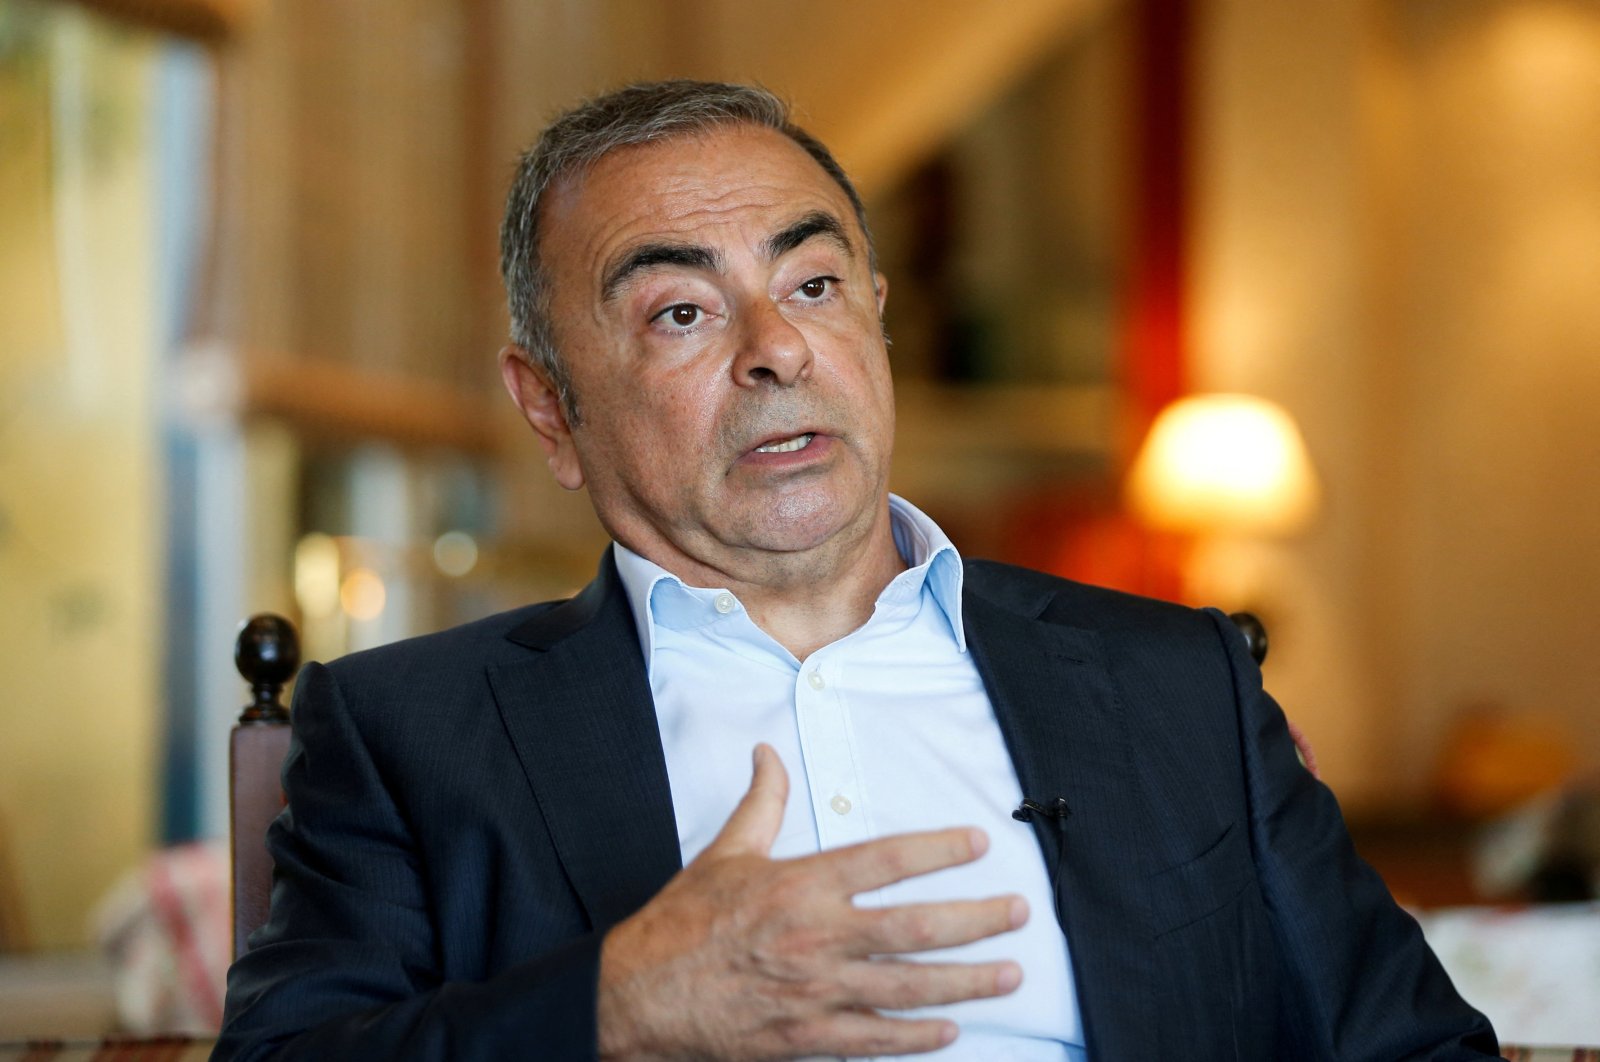 Fugitive former car executive Carlos Ghosn, gestures as he talks during an interview with Reuters in Beirut, Lebanon June 14, 2021. (Reuters File Photo)